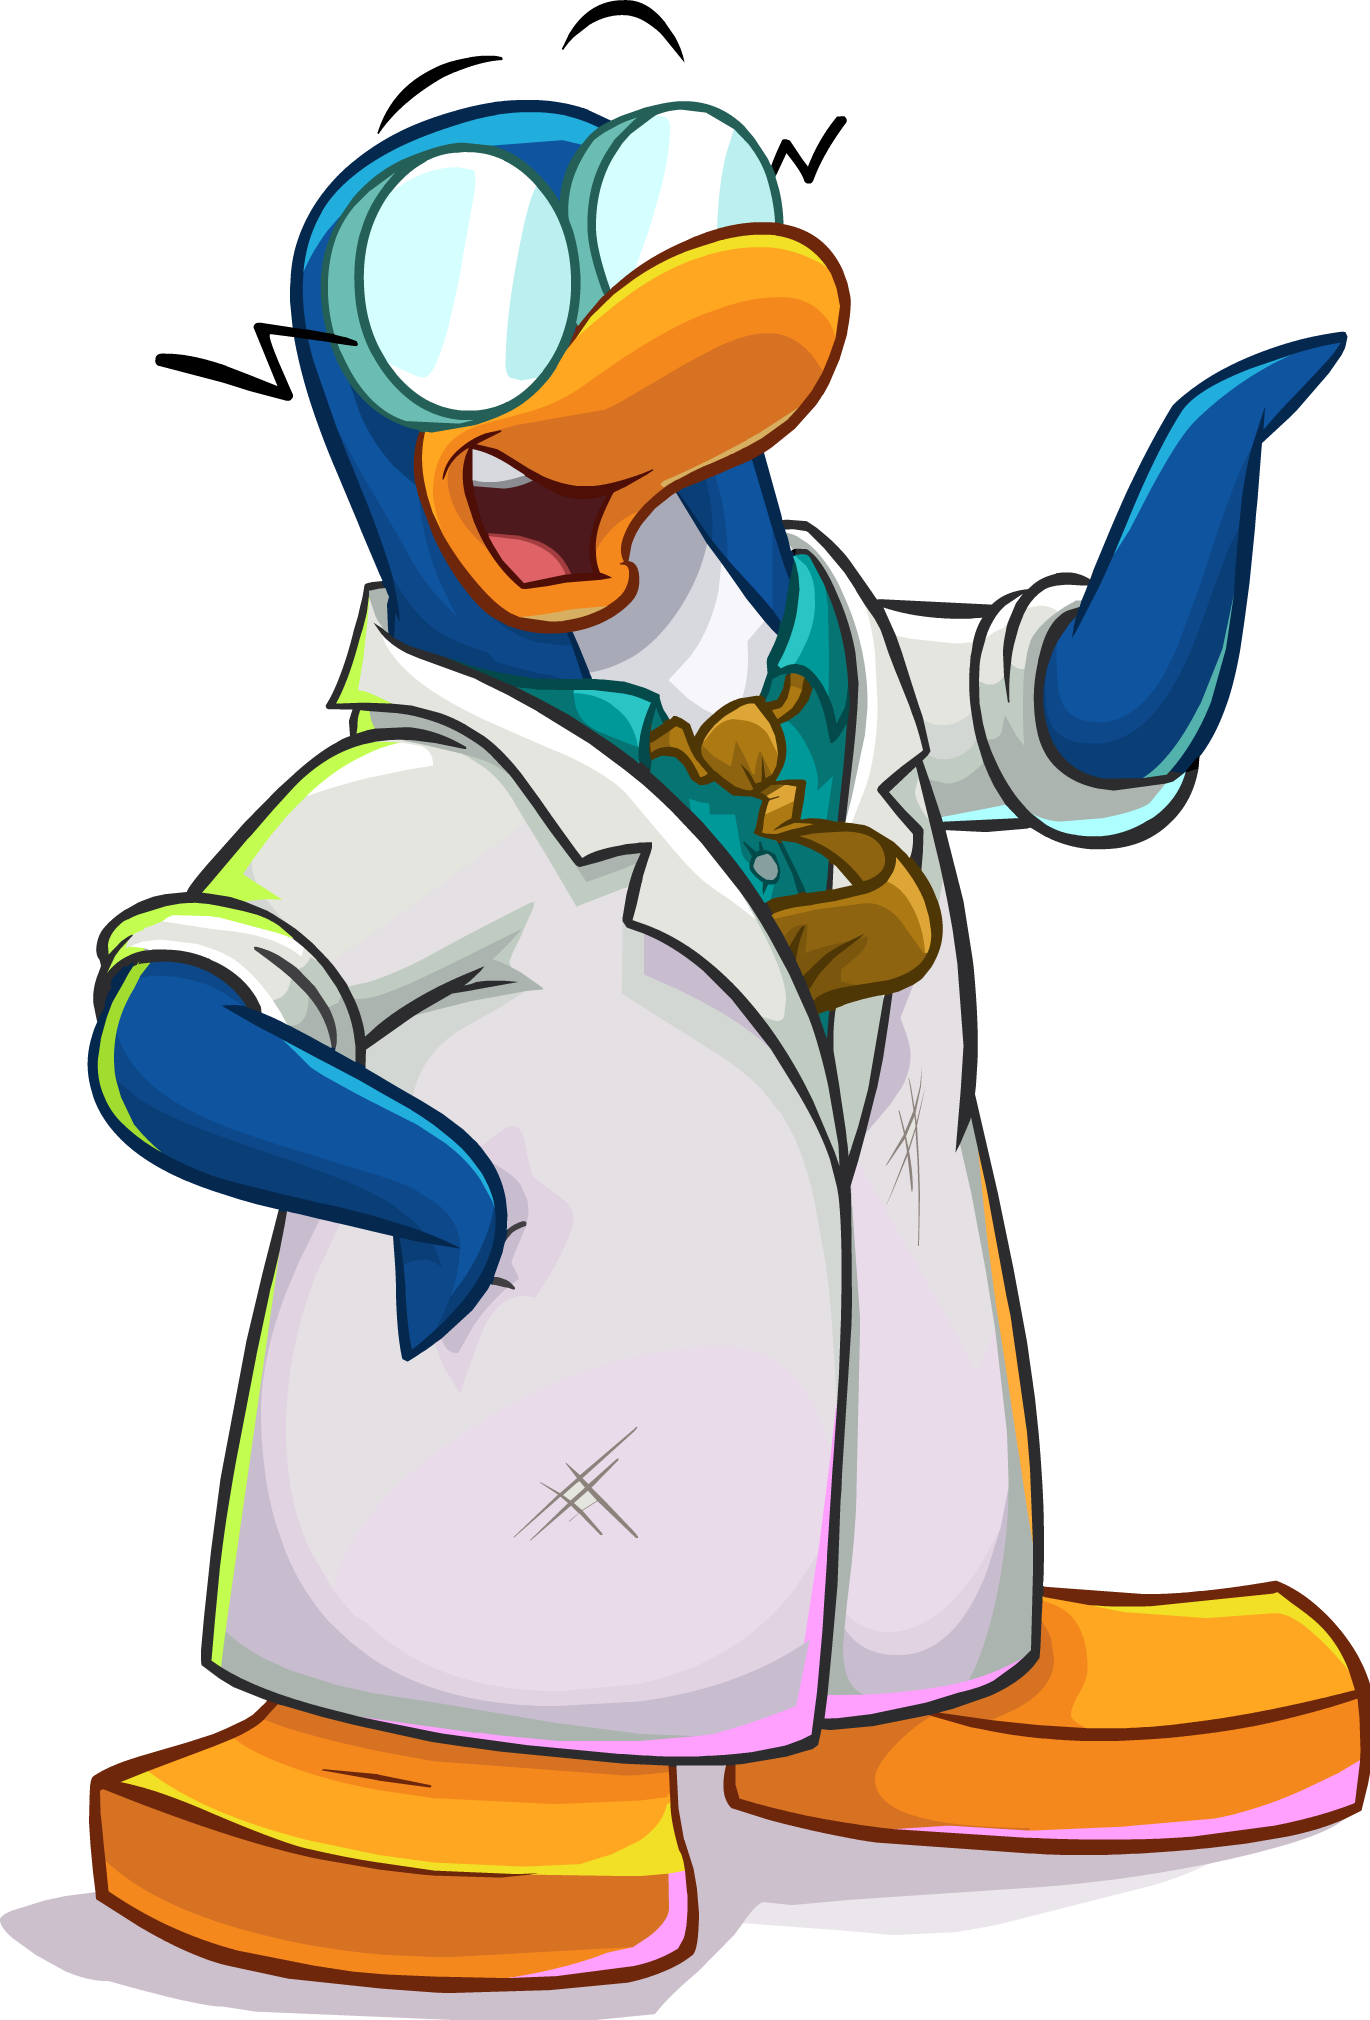 Club Penguin Soundtrack on X: The Gadget Room theme from Club Penguin:  Elite Penguin Force, in the highest available quality! Also known as Gary's  Theme. Played in the Gadget Room, and Gary's